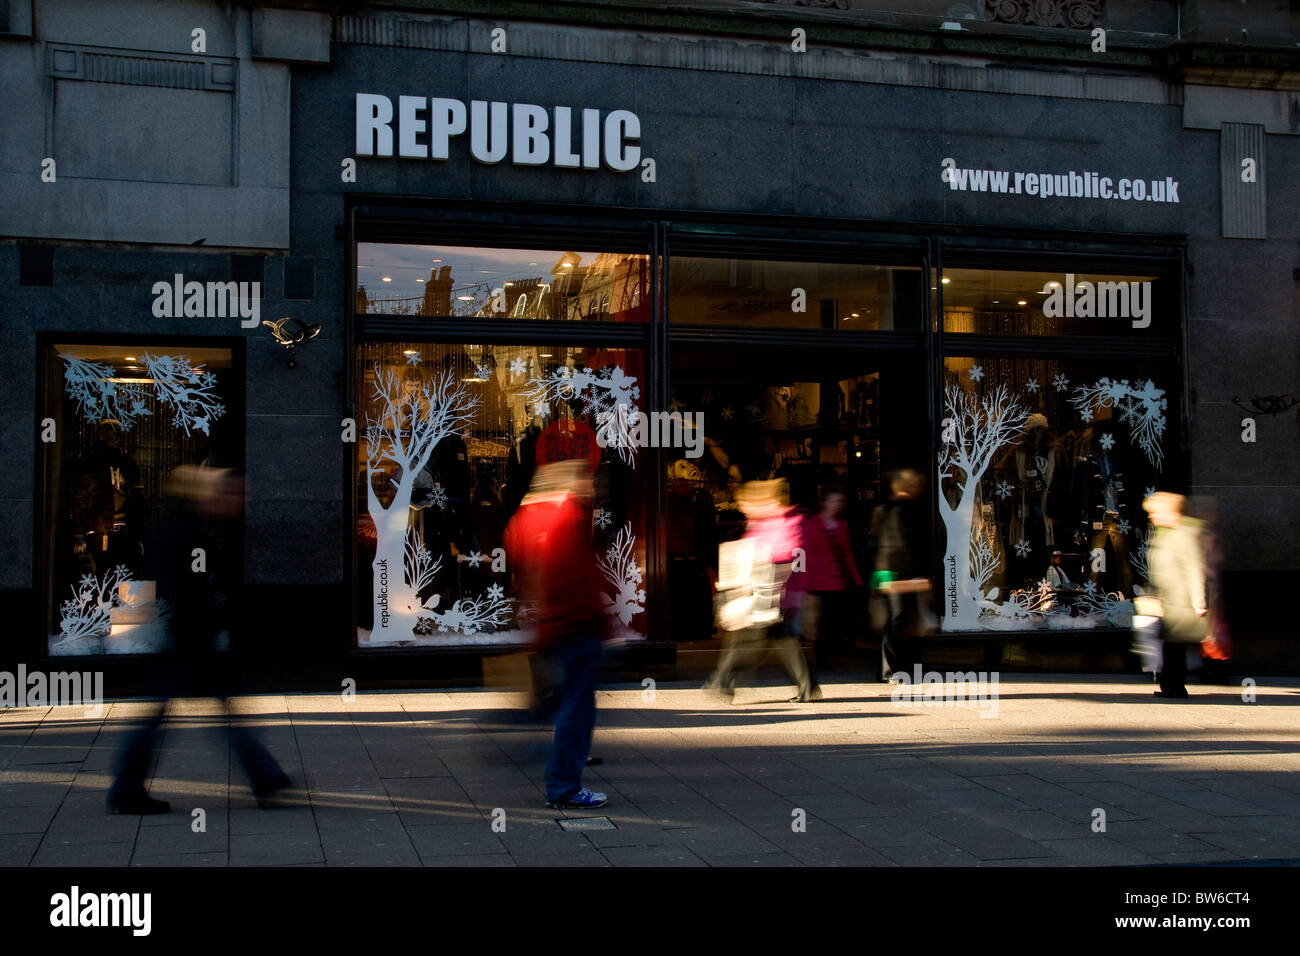 Republic Clothes Shop High Resolution Stock Photography and Images - Alamy